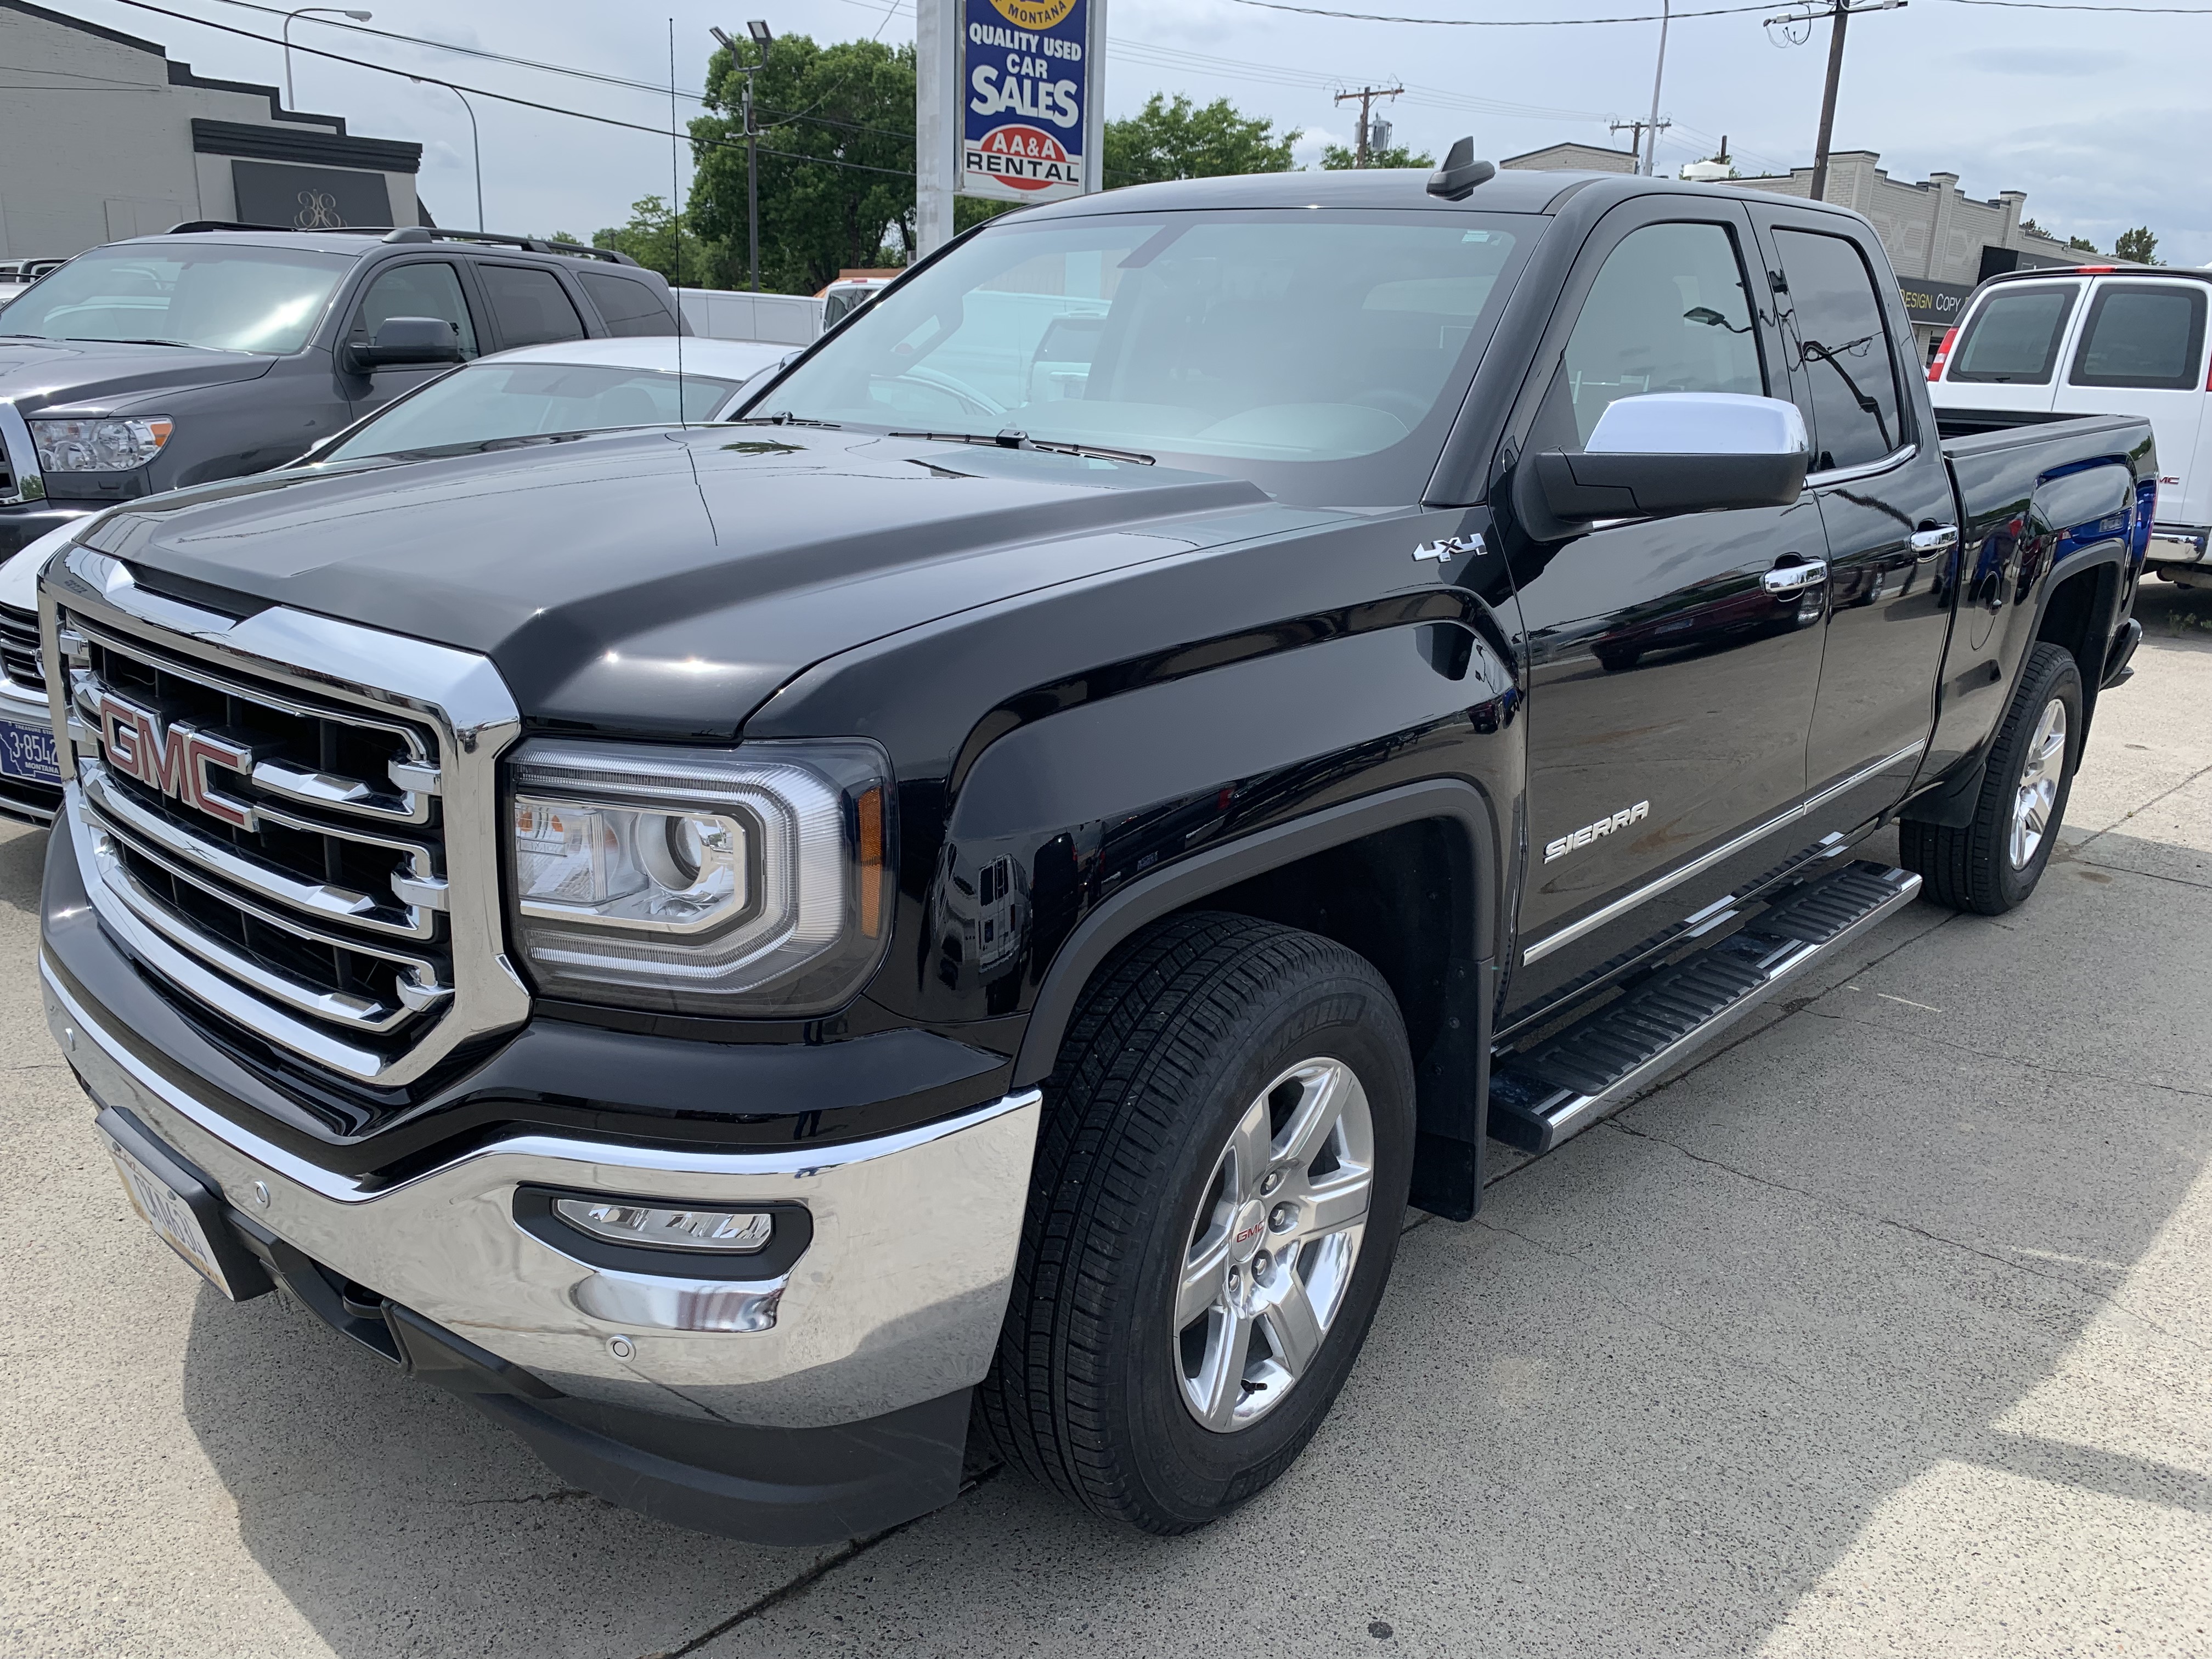 GMC Sierra Double Cab exterior restyling